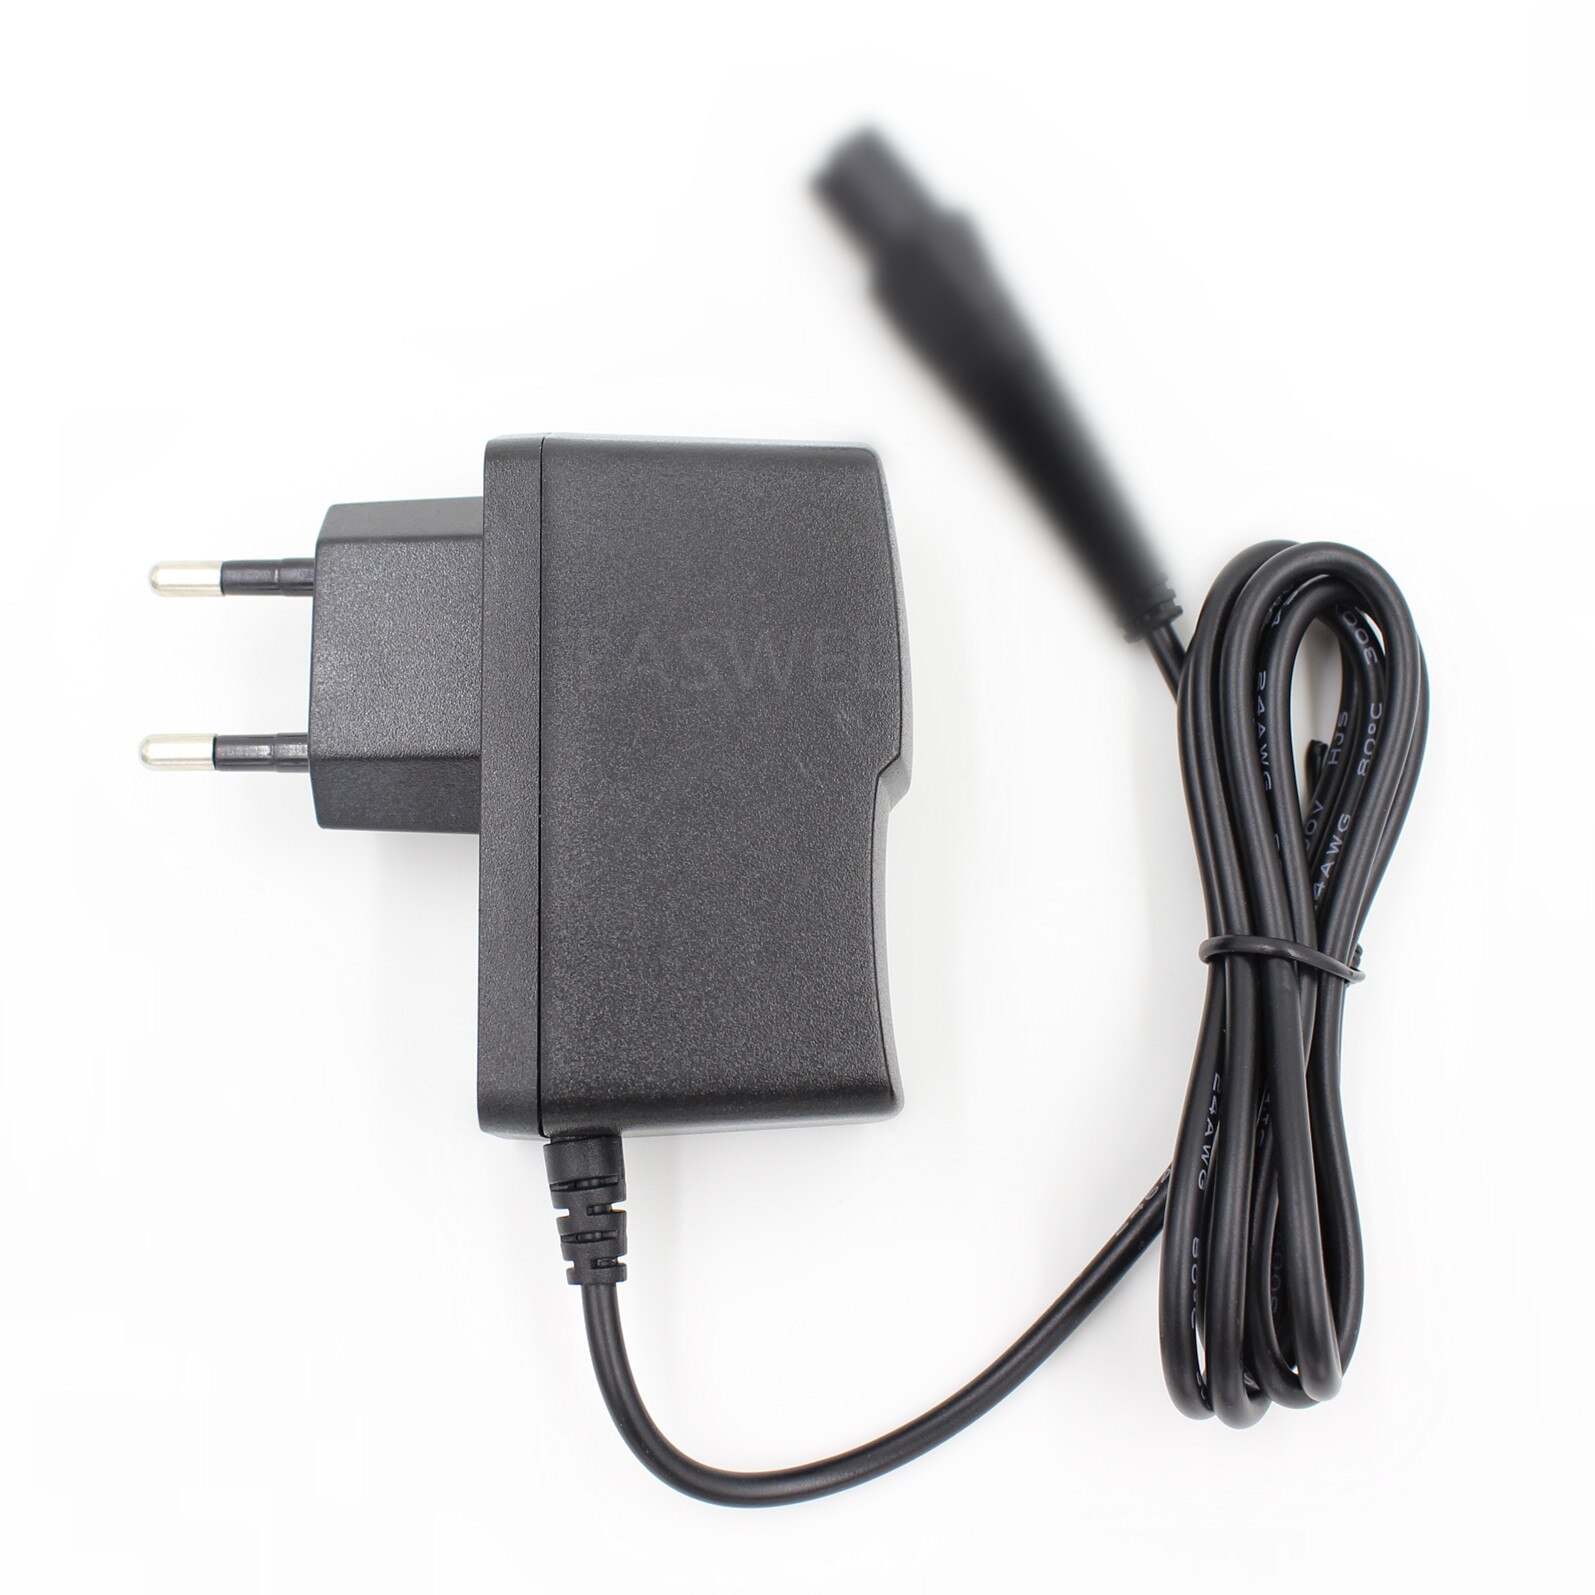 AC/DC Charger Power Adapter Cord For Braun Series 3 380S-4 390CC-4 390cc 395cc-3 / 330s-4 320s-4 Type 5415 Shaver